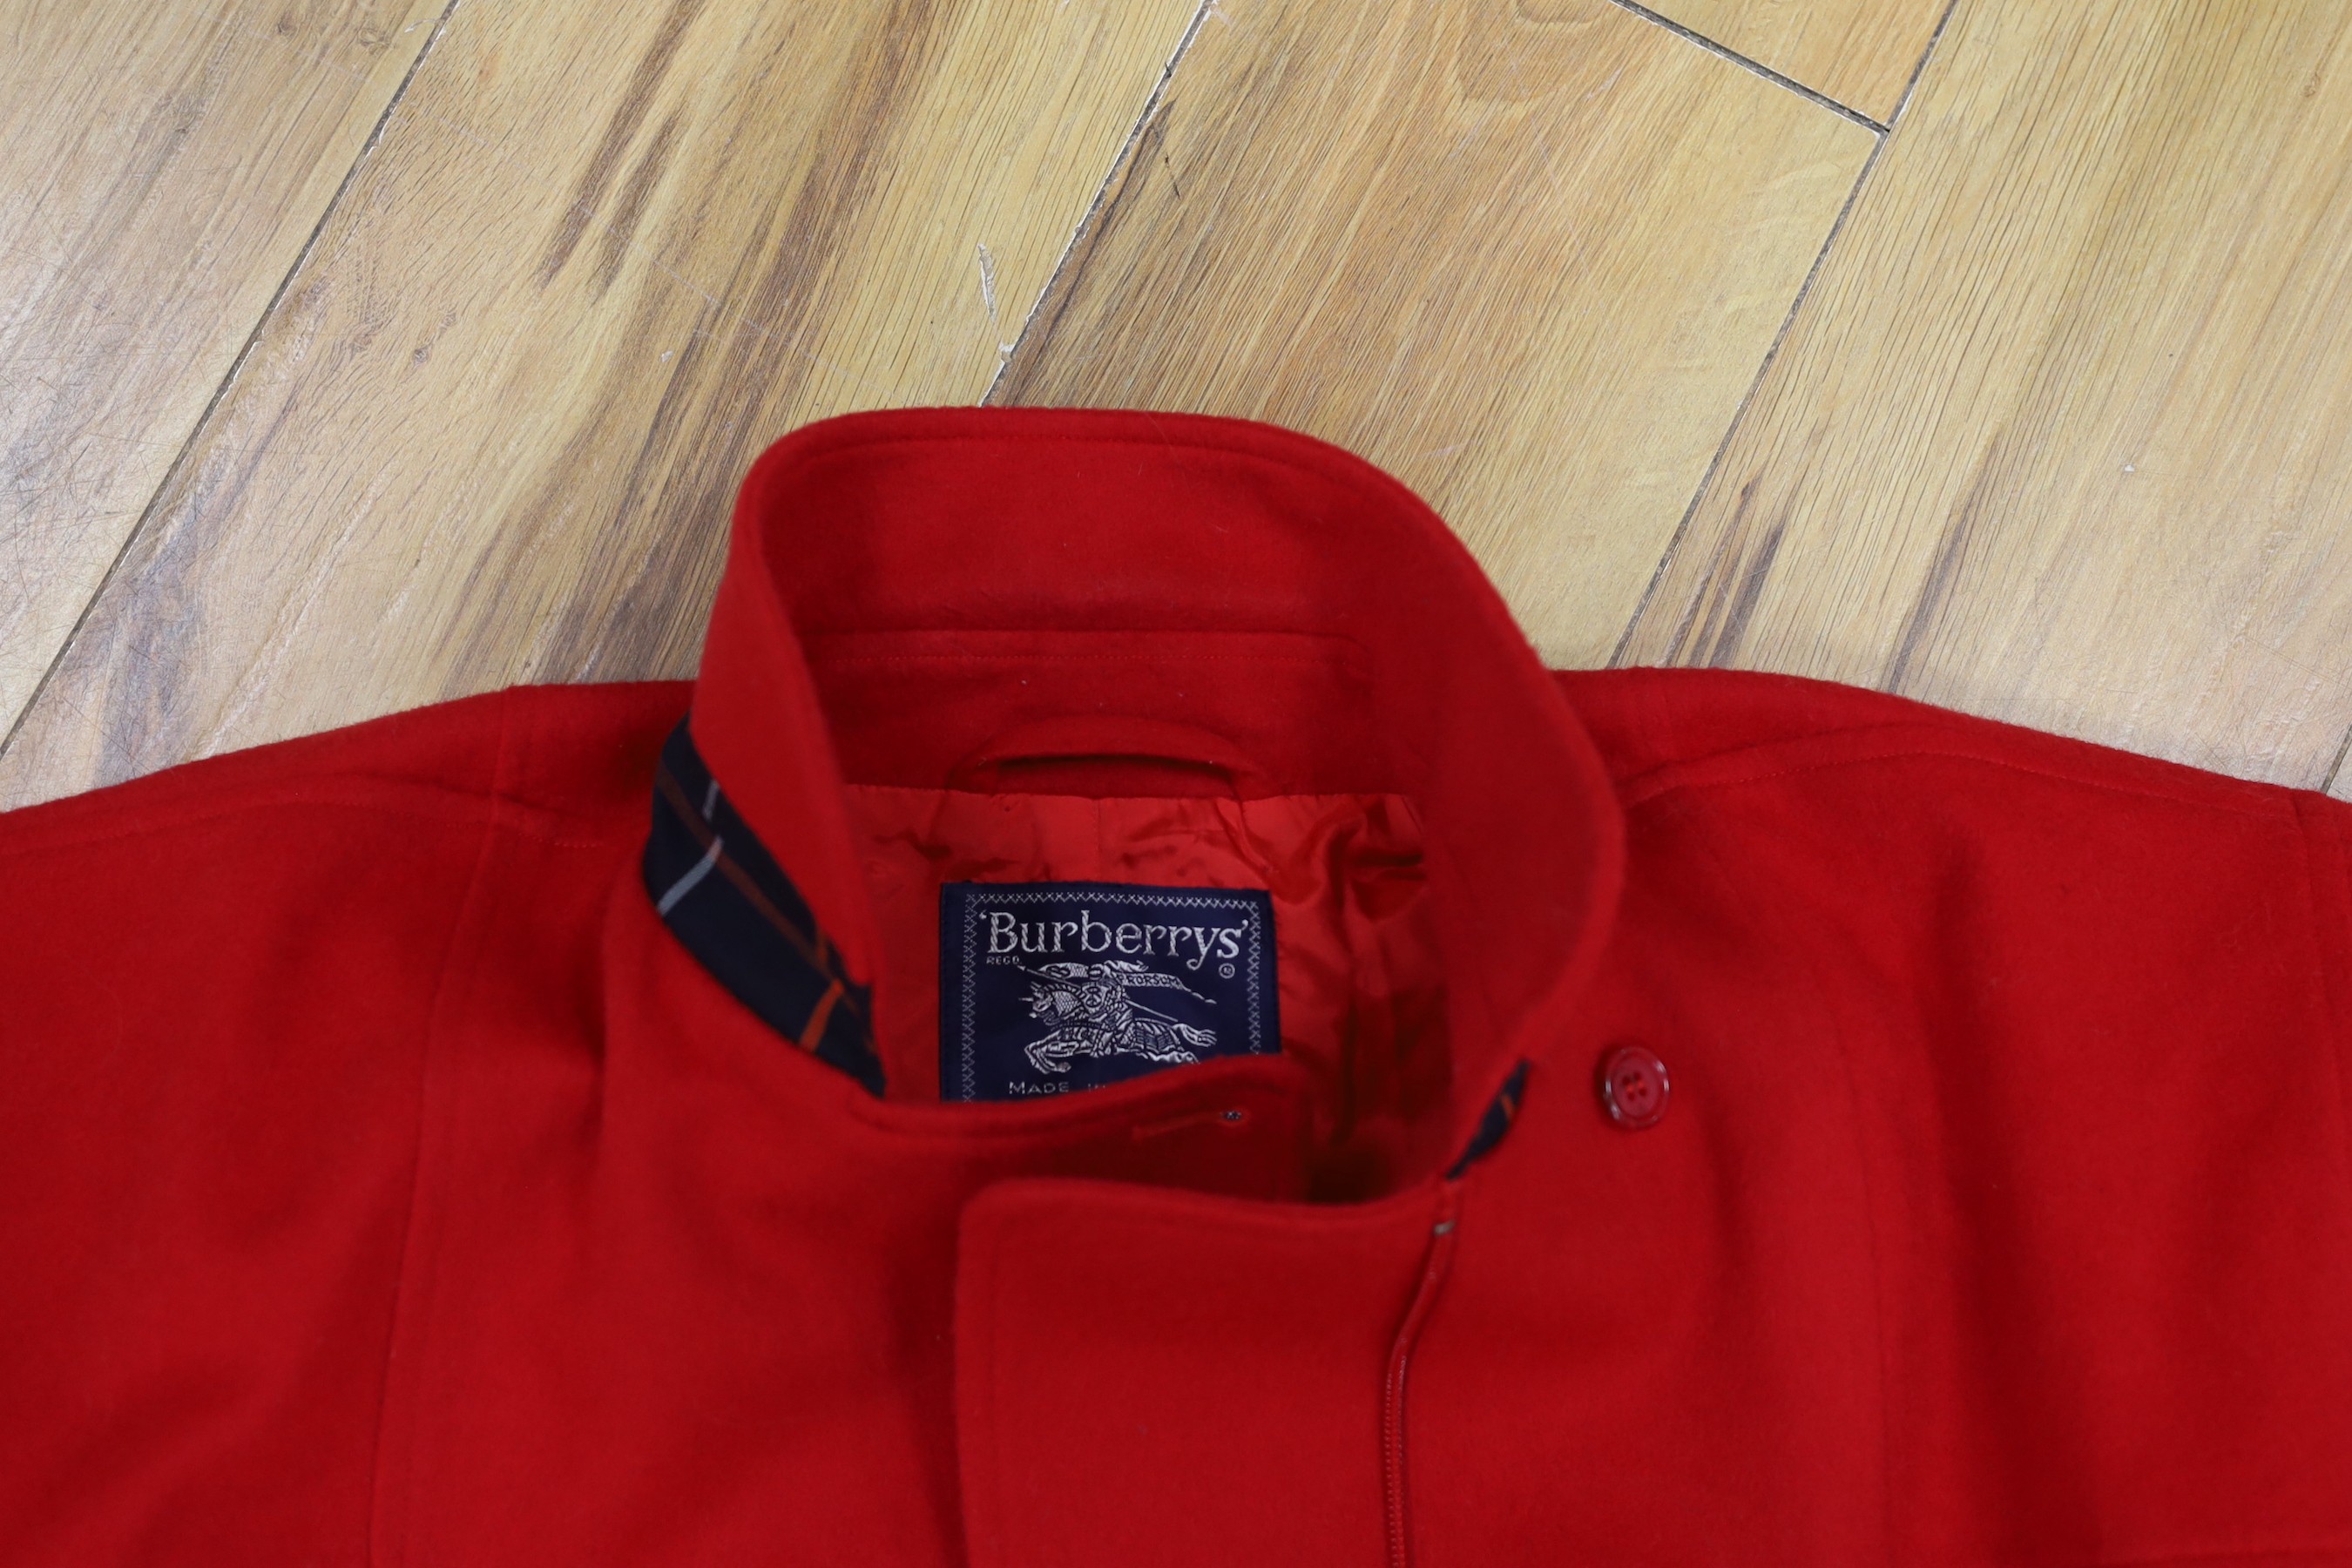 Two vintage Burberry items of clothing: a pleated skirt and a red Harrington jacket